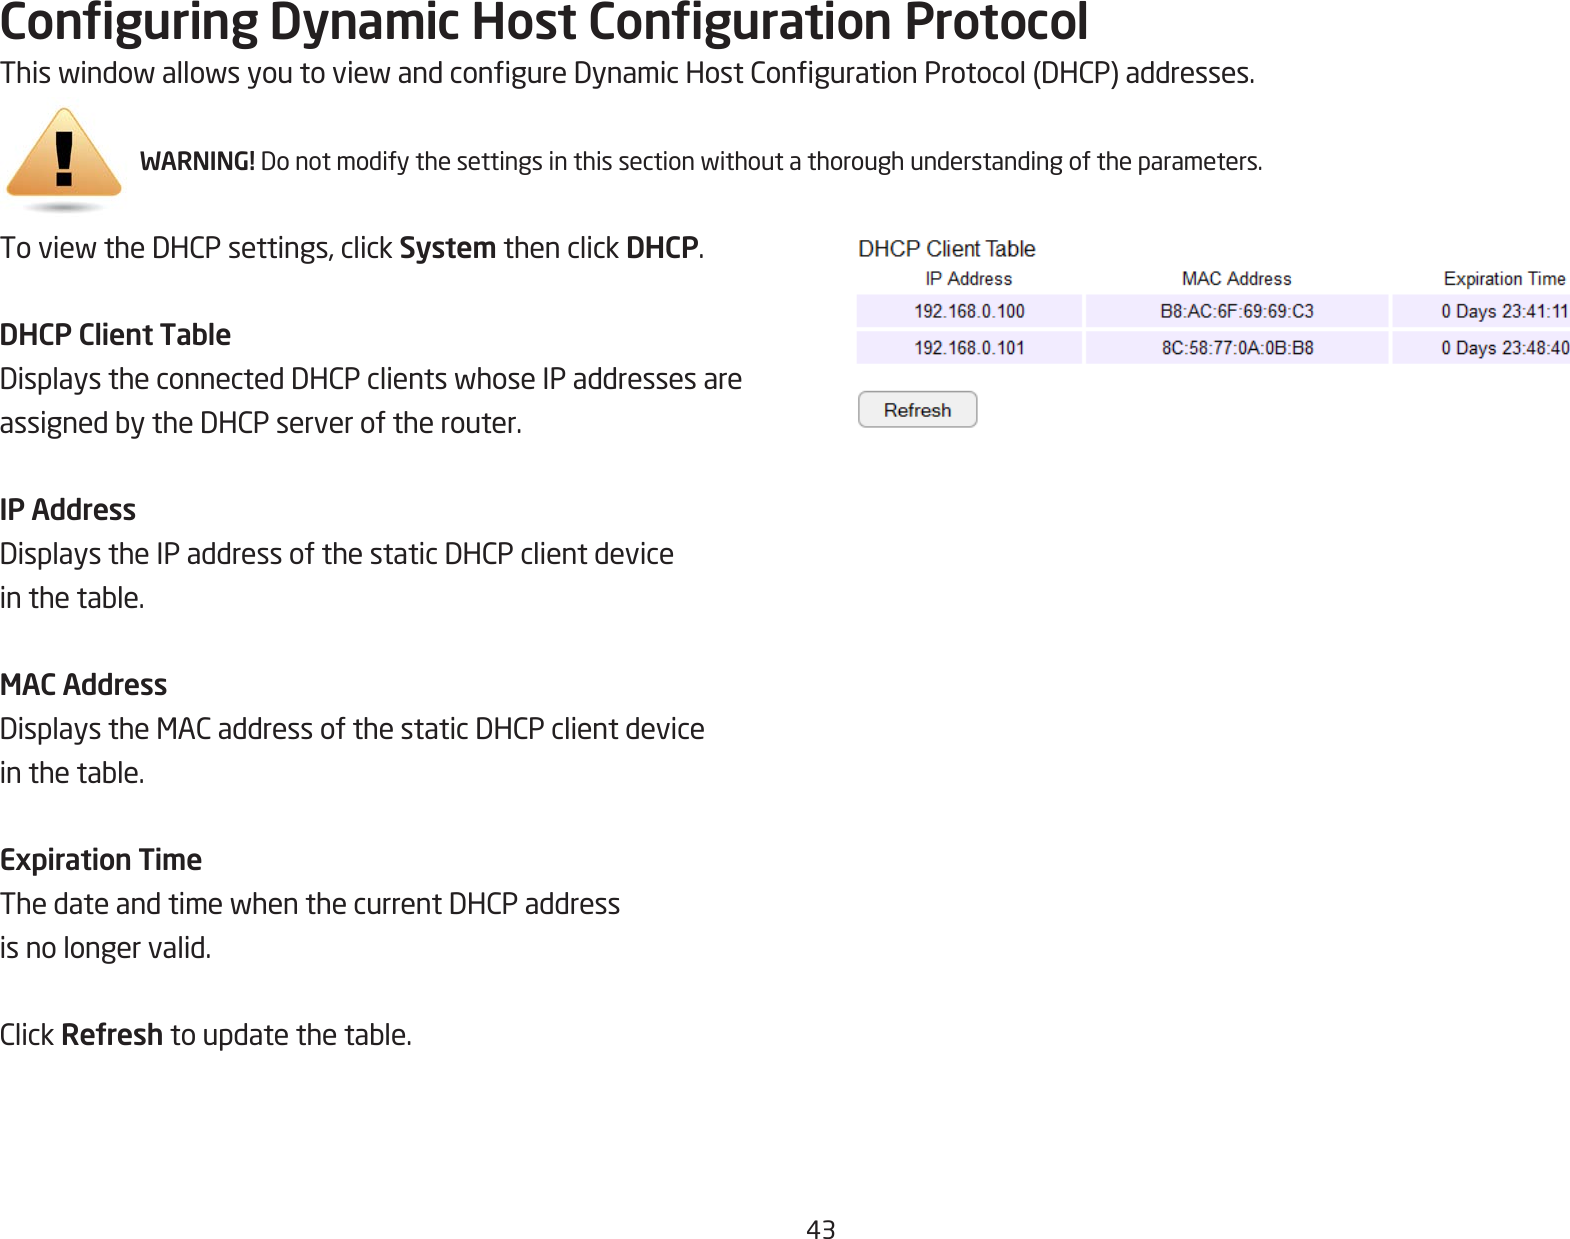 43Conguring Dynamic Host Conguration ProtocolThiswindowallowsyoutoviewandcongureDynamicHostCongurationProtocol(DHCP)addresses.WARNING! Donotmodifythesettingsinthissectionwithoutathoroughunderstandingoftheparameters.ToviewtheDHCPsettings,clickSystem then click DHCP.DHCP Client TableDisplaystheconnectedDHCPclientswhoseIPaddressesareassignedbytheDHCPserveroftherouter.IP AddressDisplaystheIPaddressofthestaticDHCPclientdeviceinthetable.MAC AddressDisplaystheMACaddressofthestaticDHCPclientdeviceinthetable.Expiration TimeThedateandtimewhenthecurrentDHCPaddressis no longer valid.ClickRefreshtoupdatethetable.